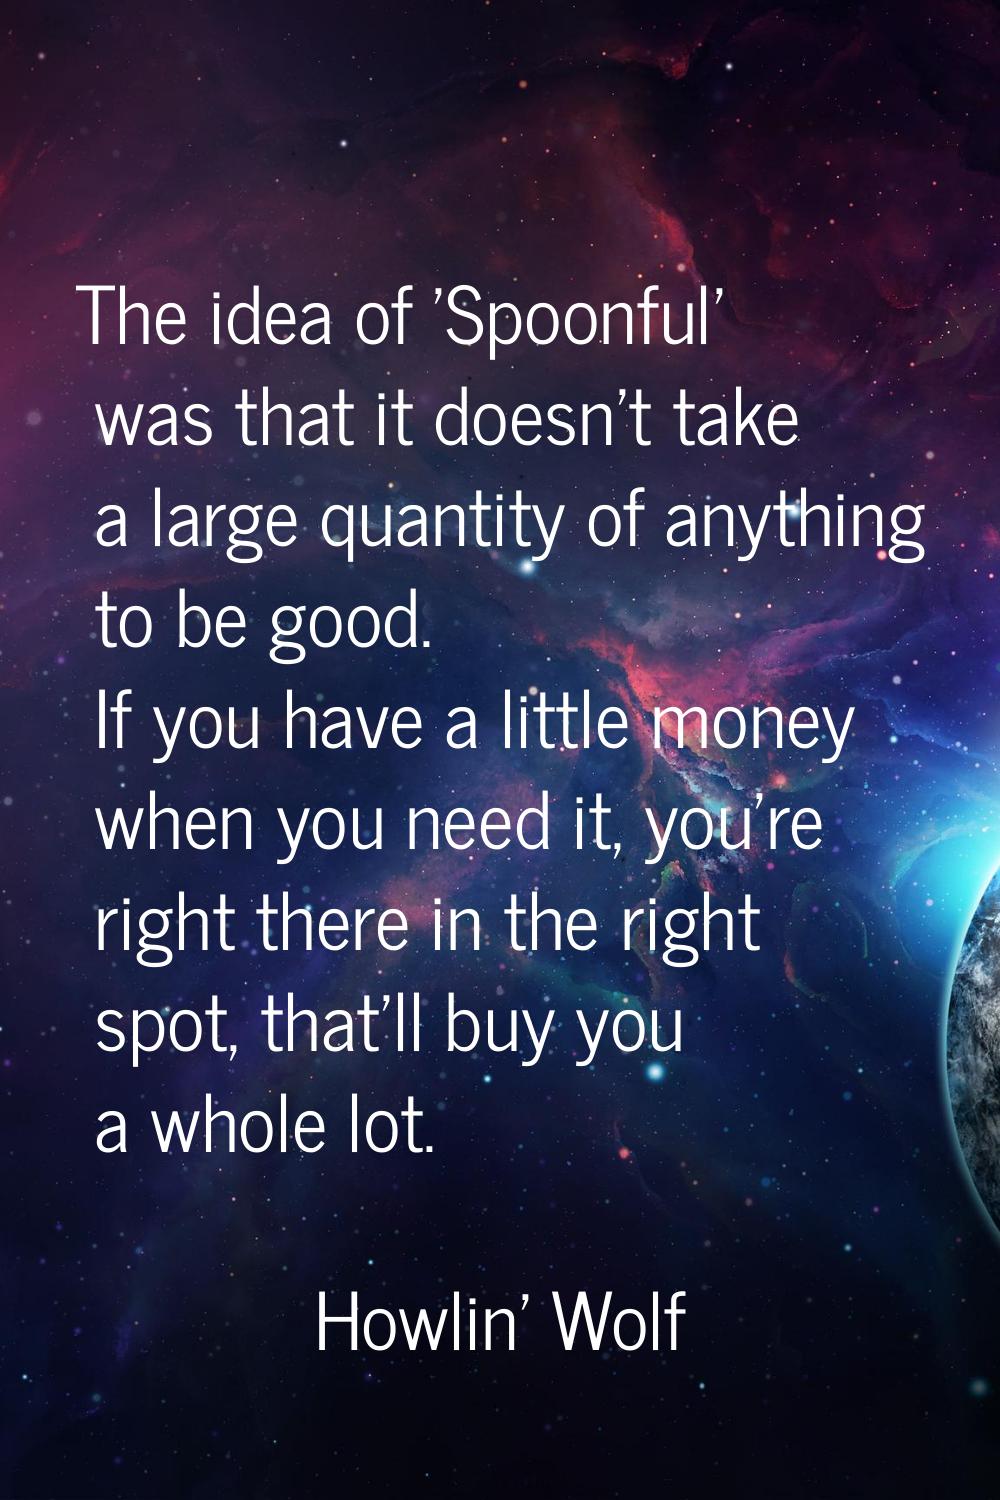 The idea of 'Spoonful' was that it doesn't take a large quantity of anything to be good. If you hav